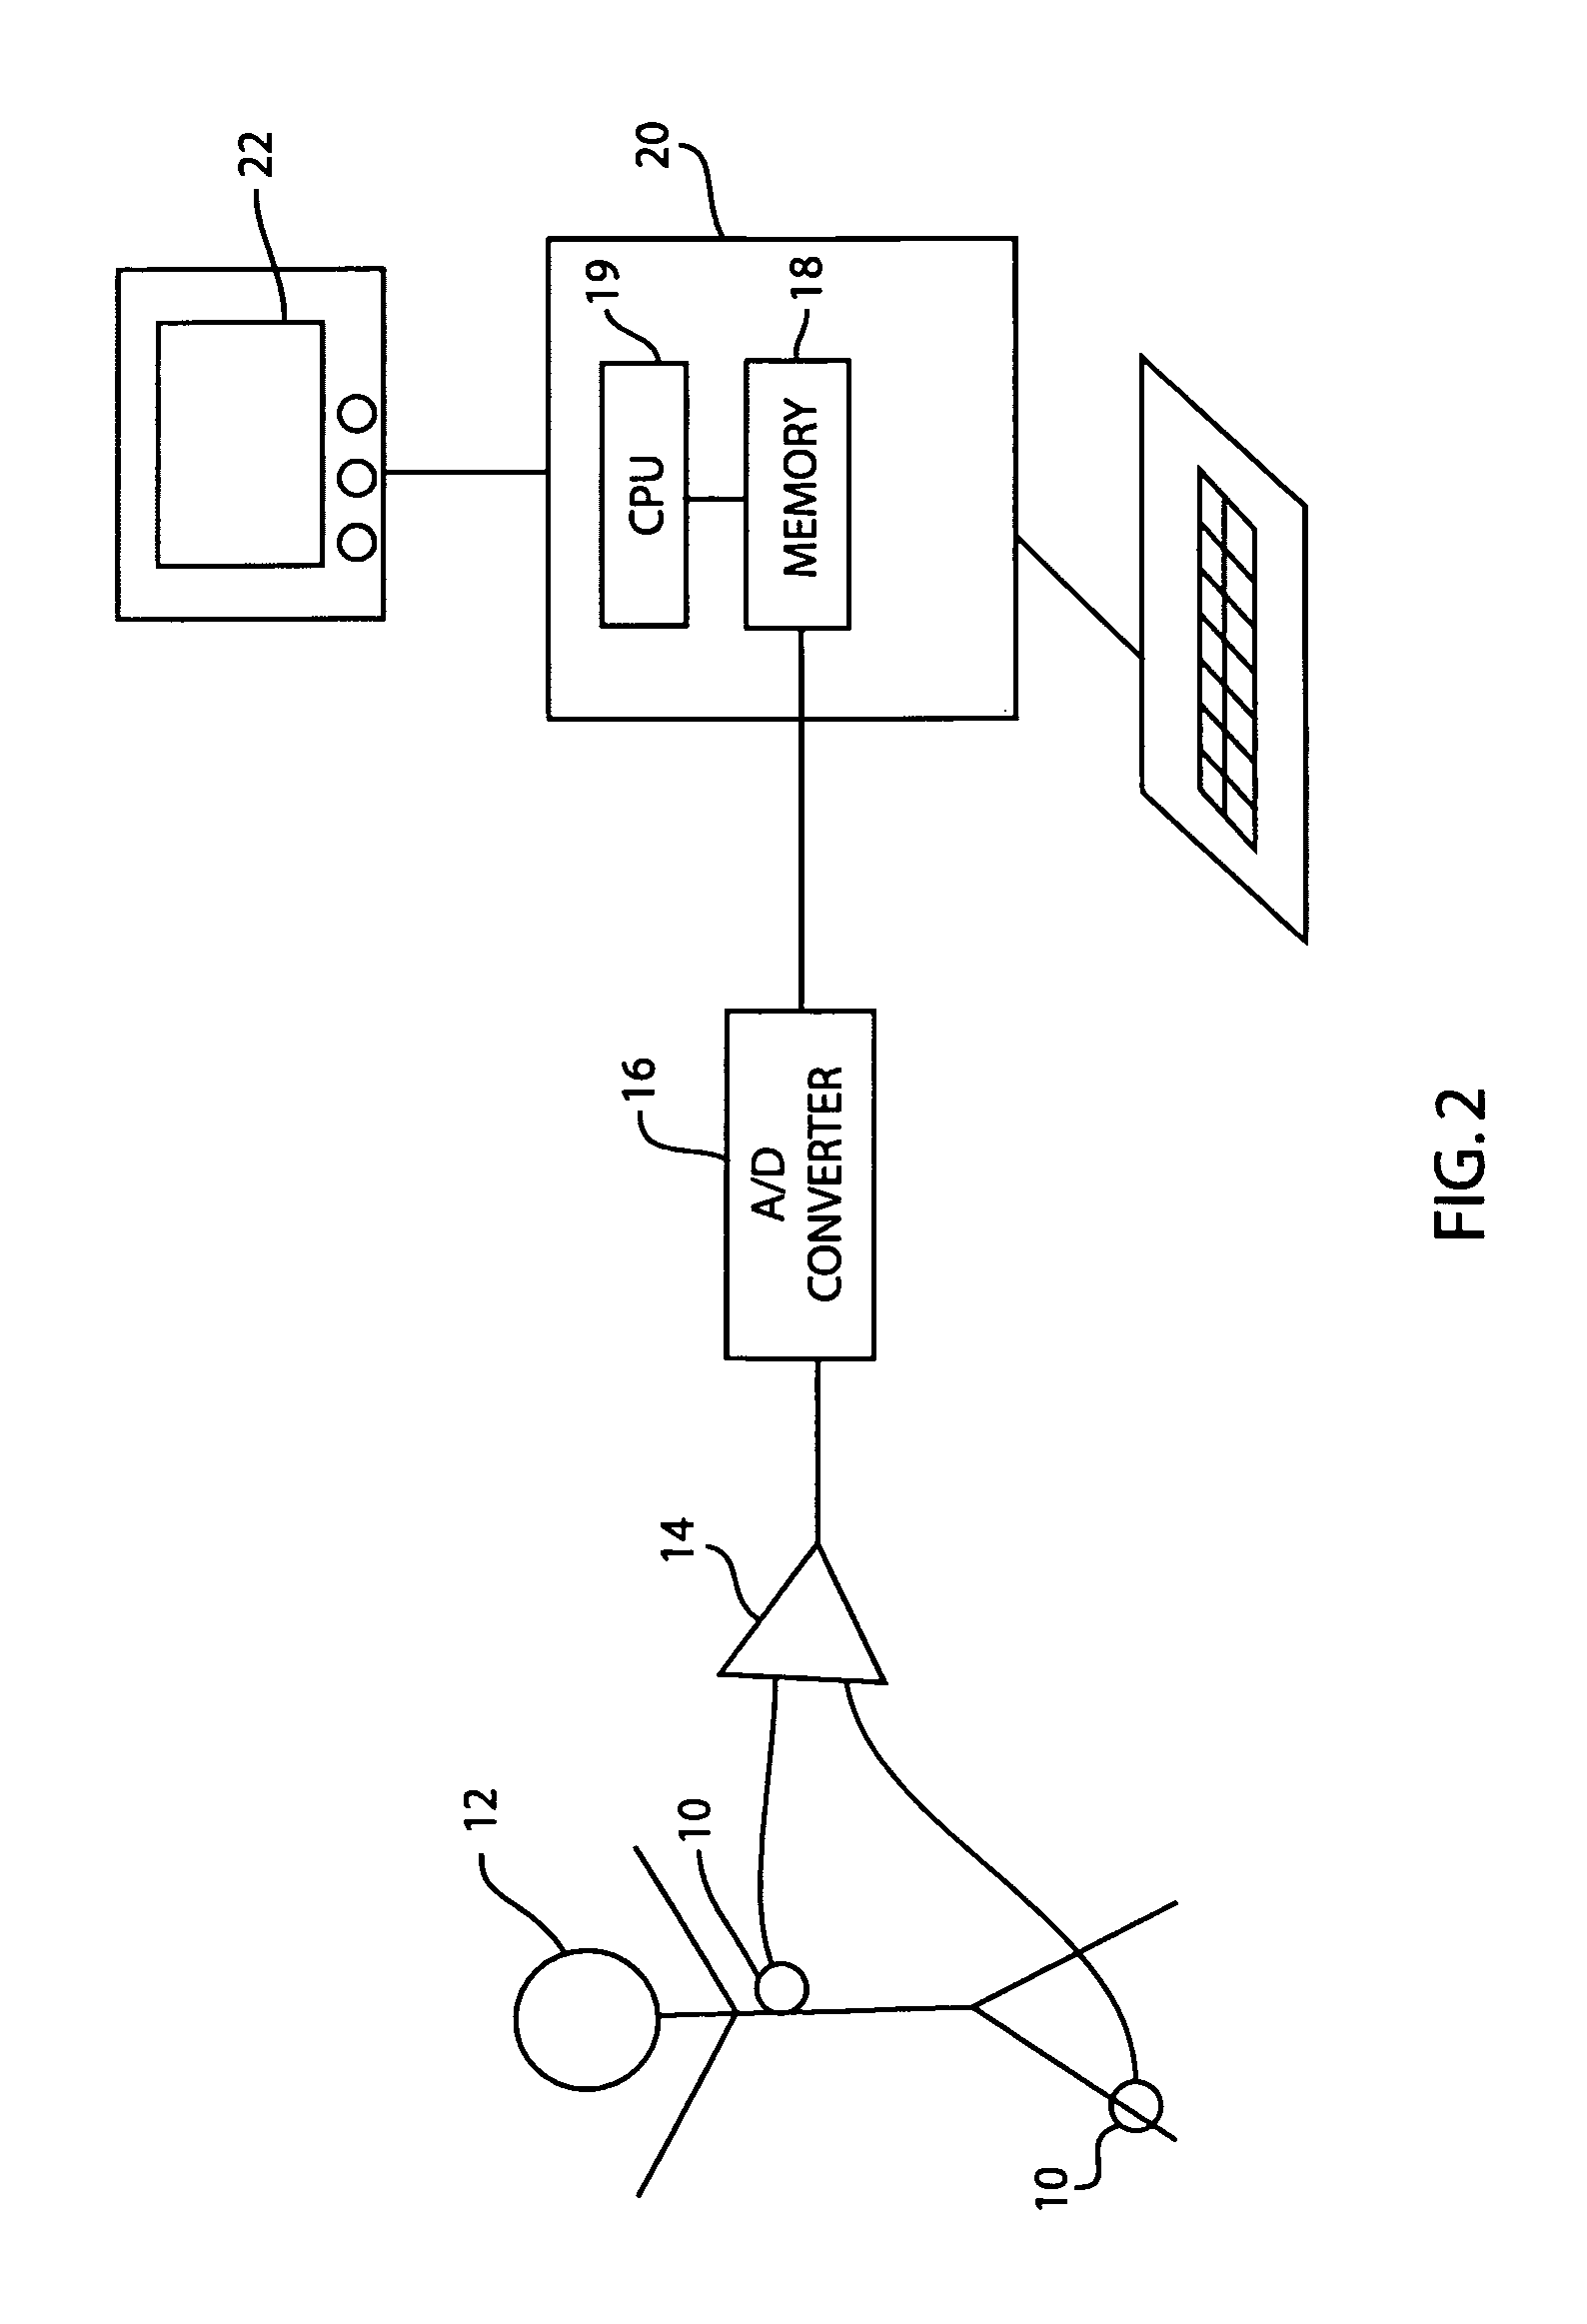 Method and apparatus for analyzing and editing ECG morphology and time series